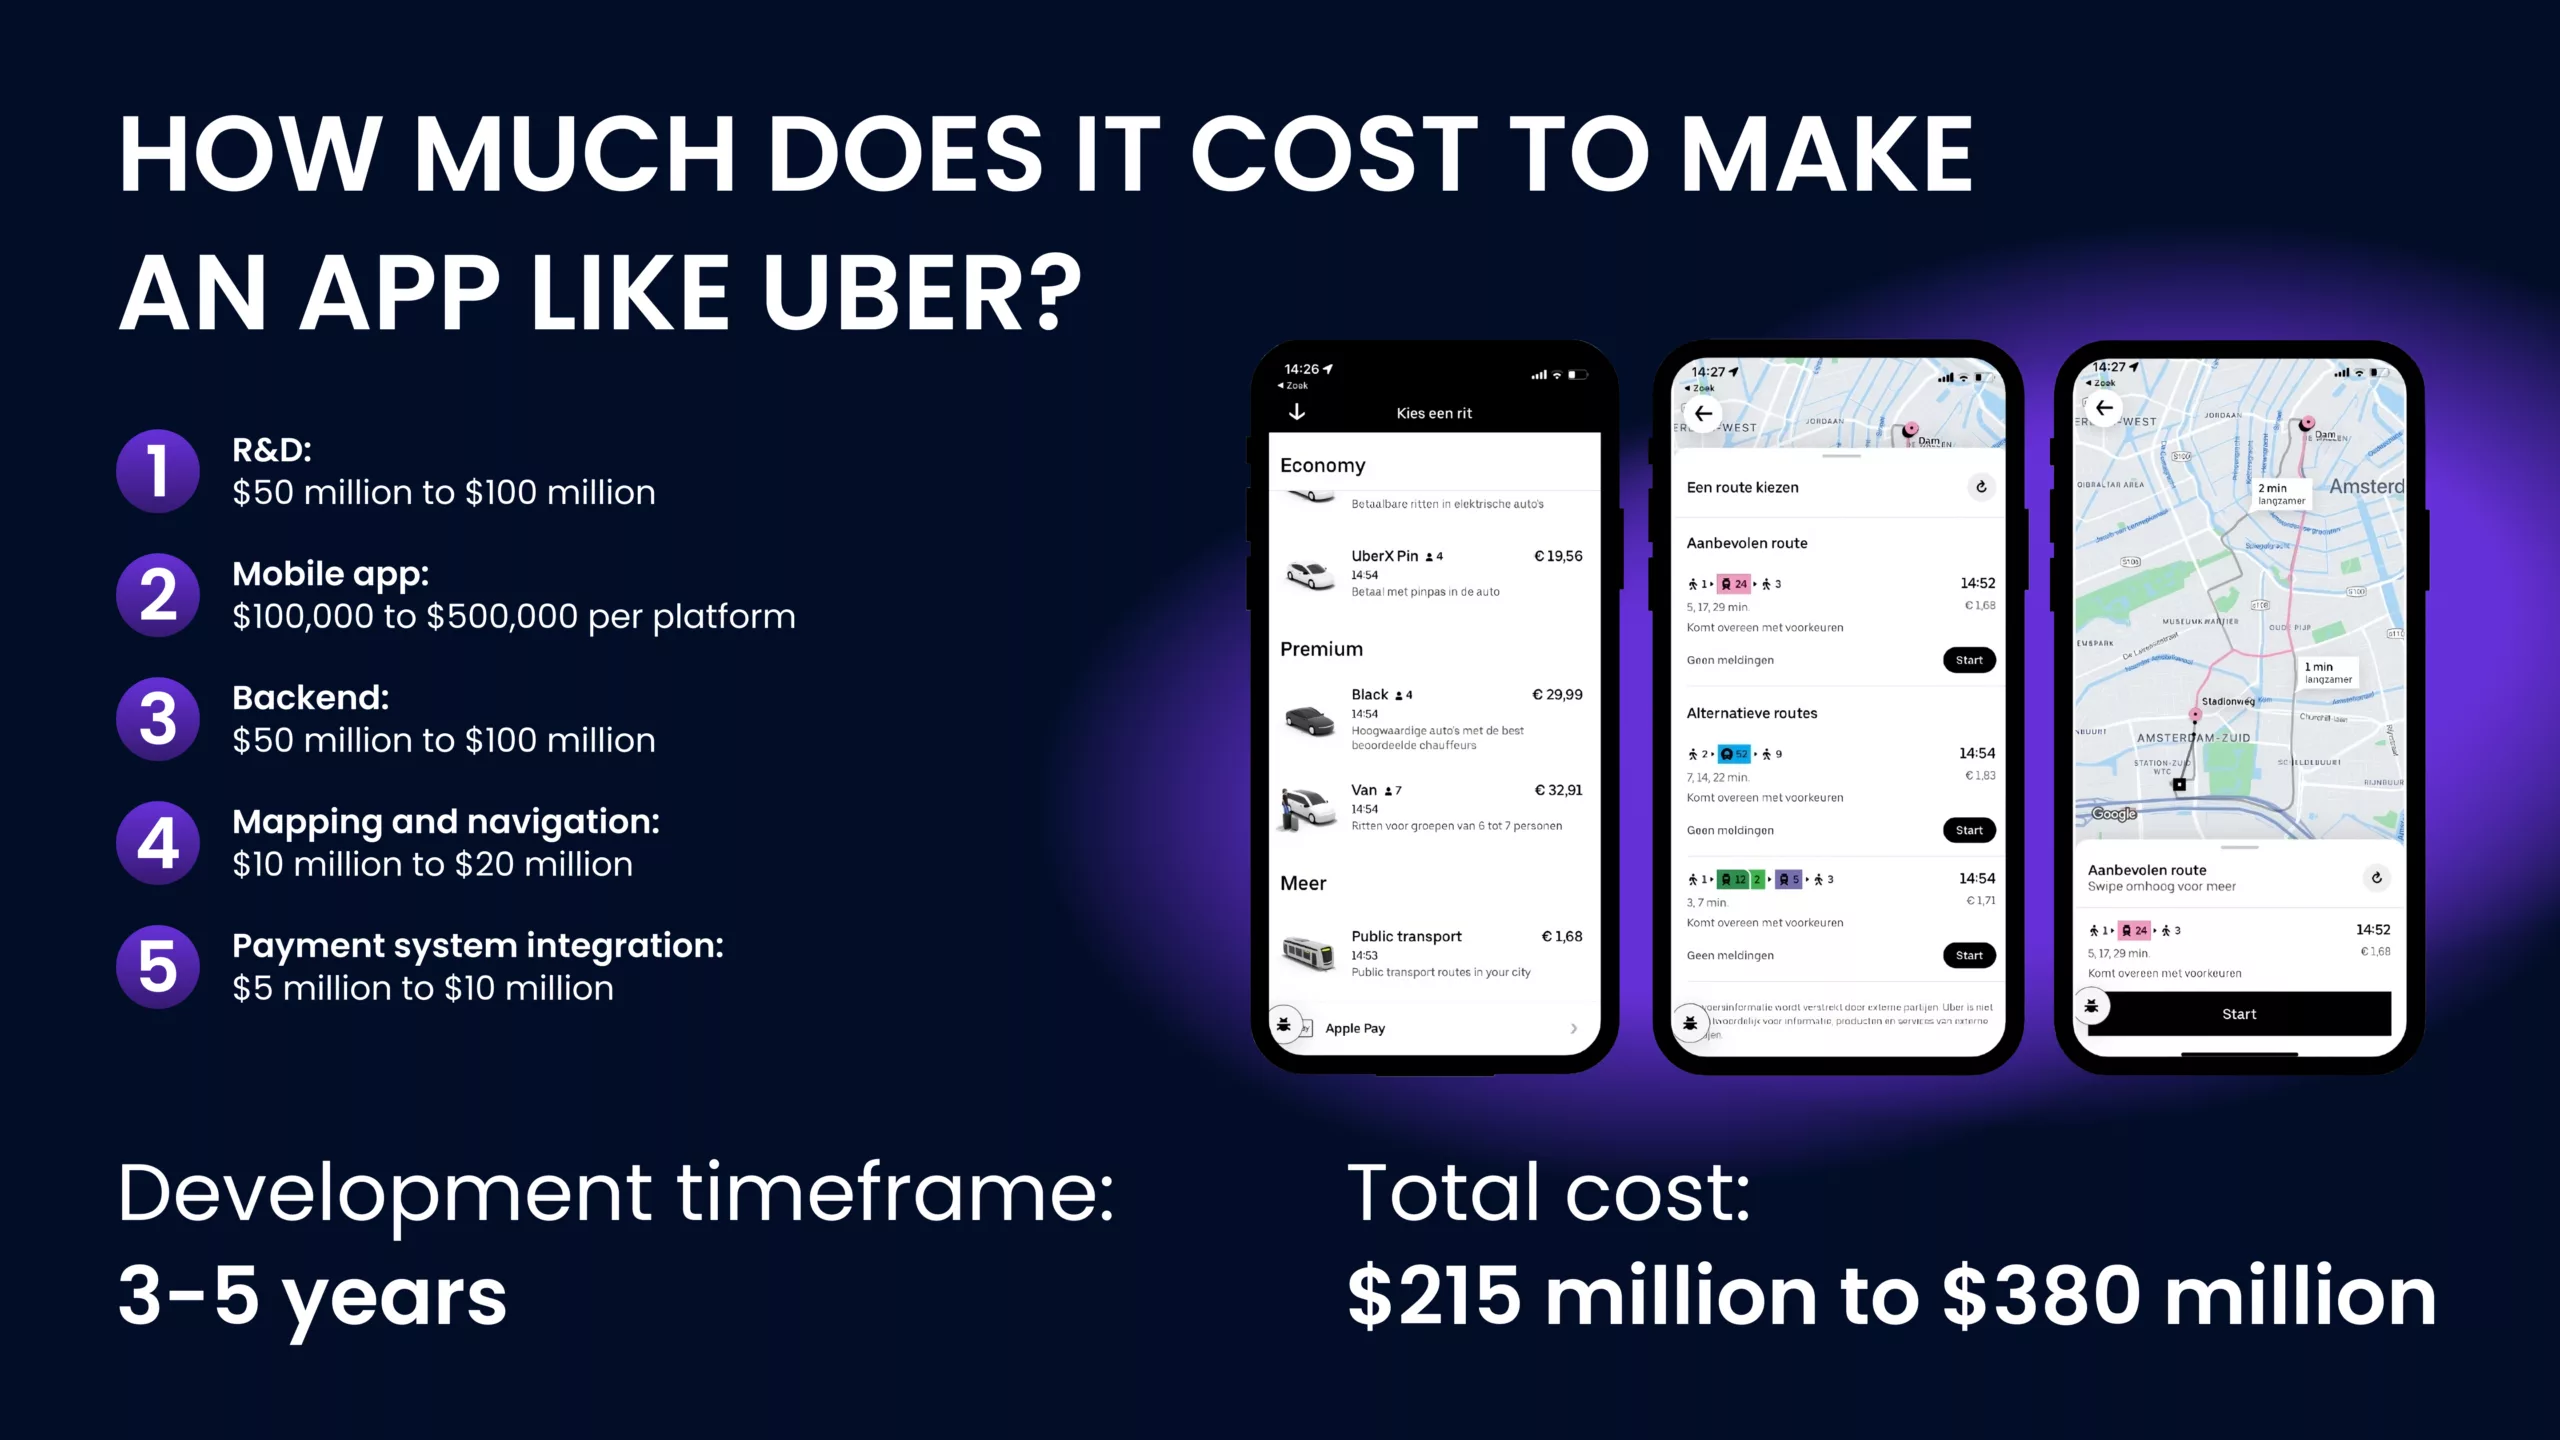  how much does it cost to make an app like Uber